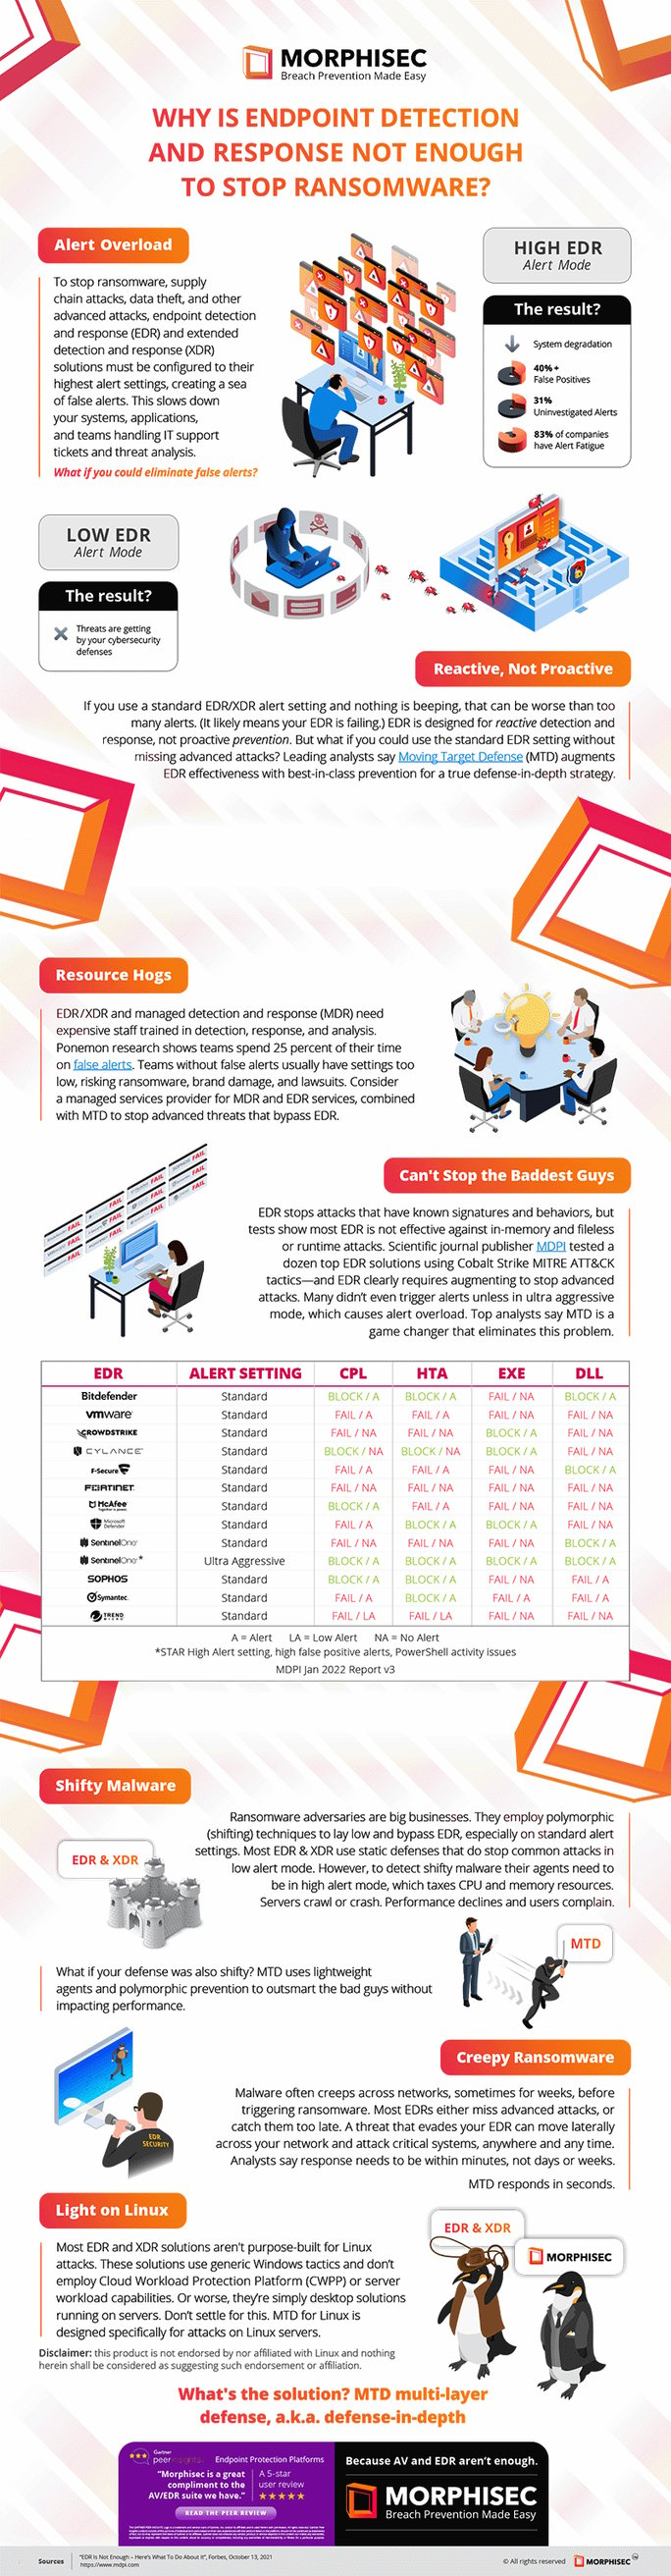 Why is EDR Note Enough to Stop Ransomware | Infographic 